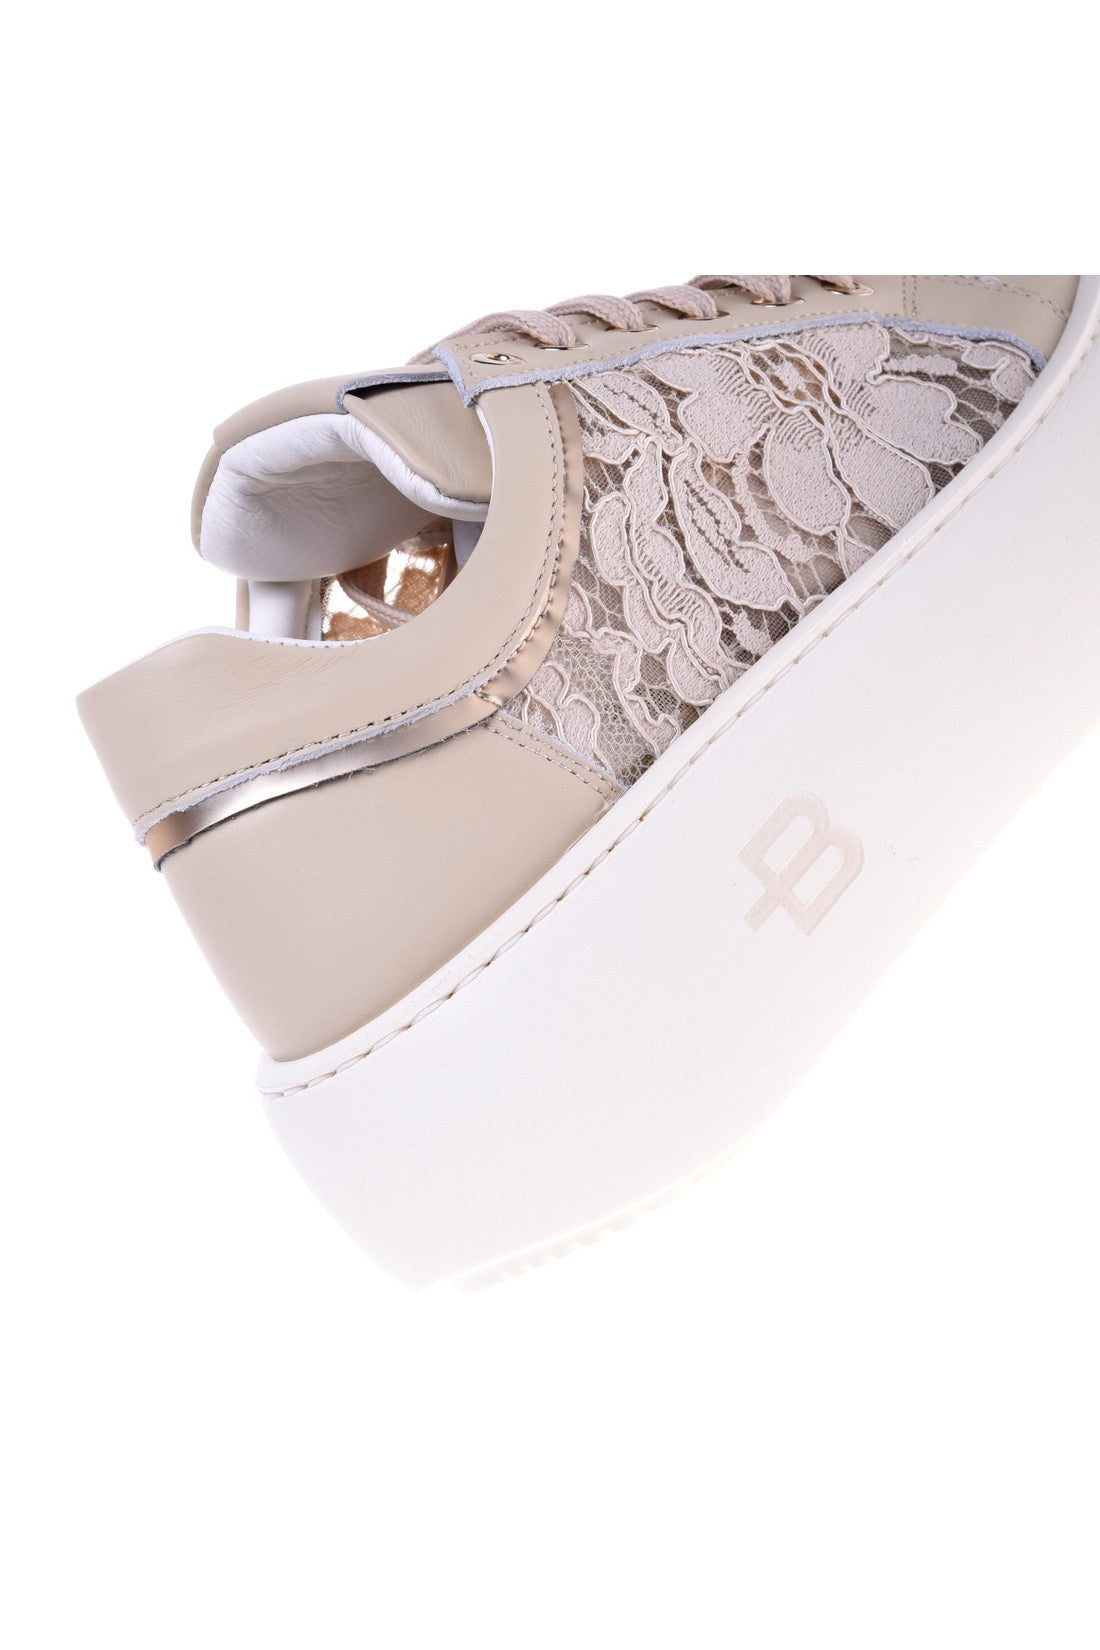 Sneaker in beige nappa leather and lace